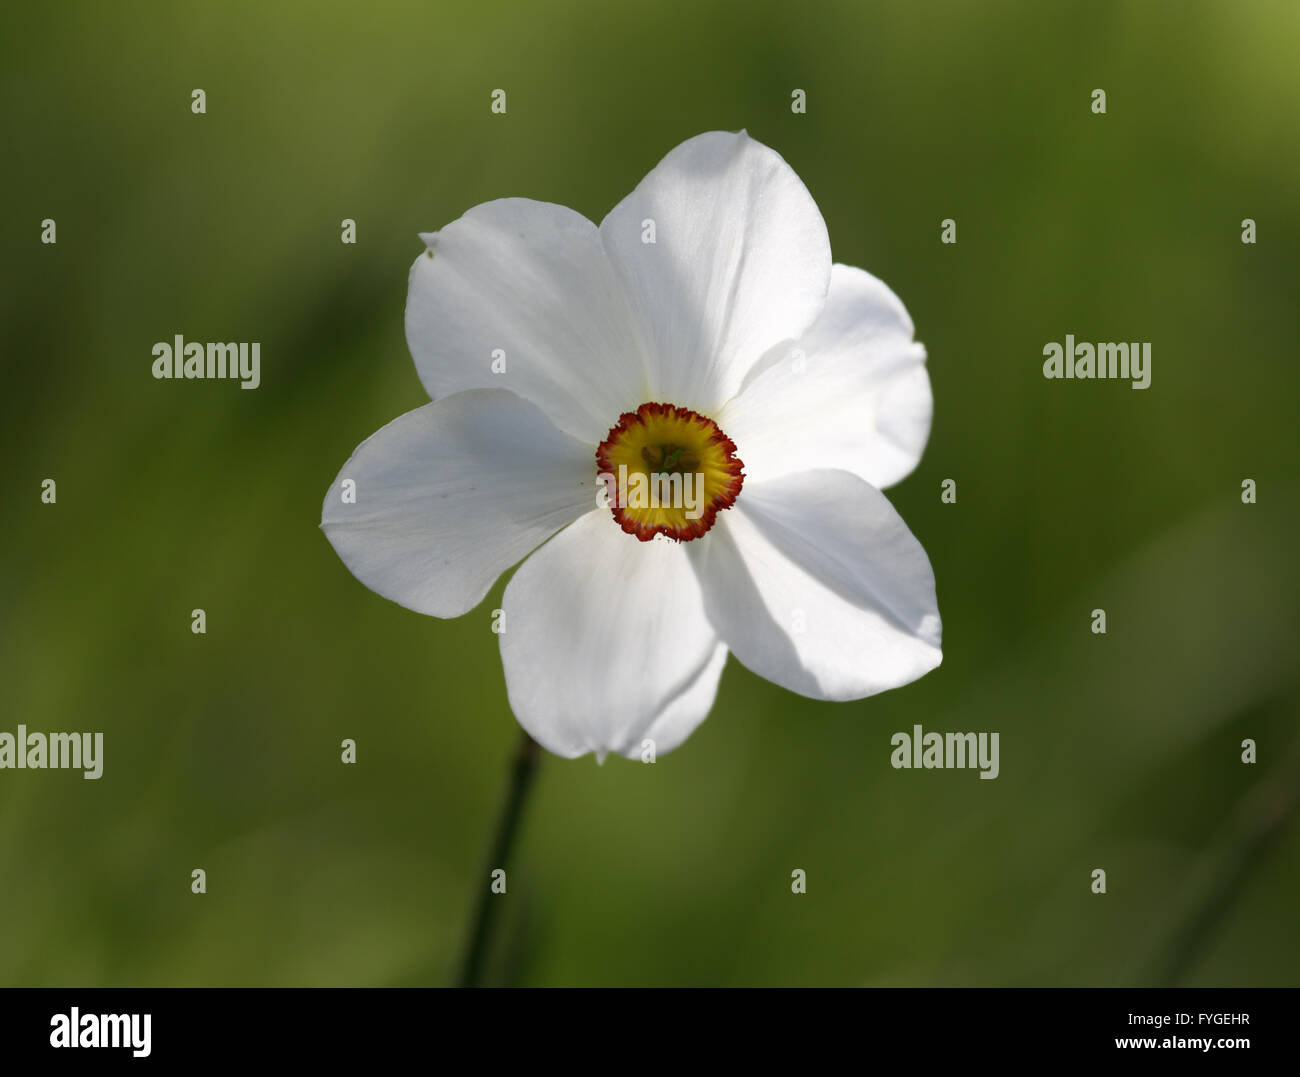 Single white narcissus, Narcissus poeticus, in the foreground with blurred greenery in the background Stock Photo